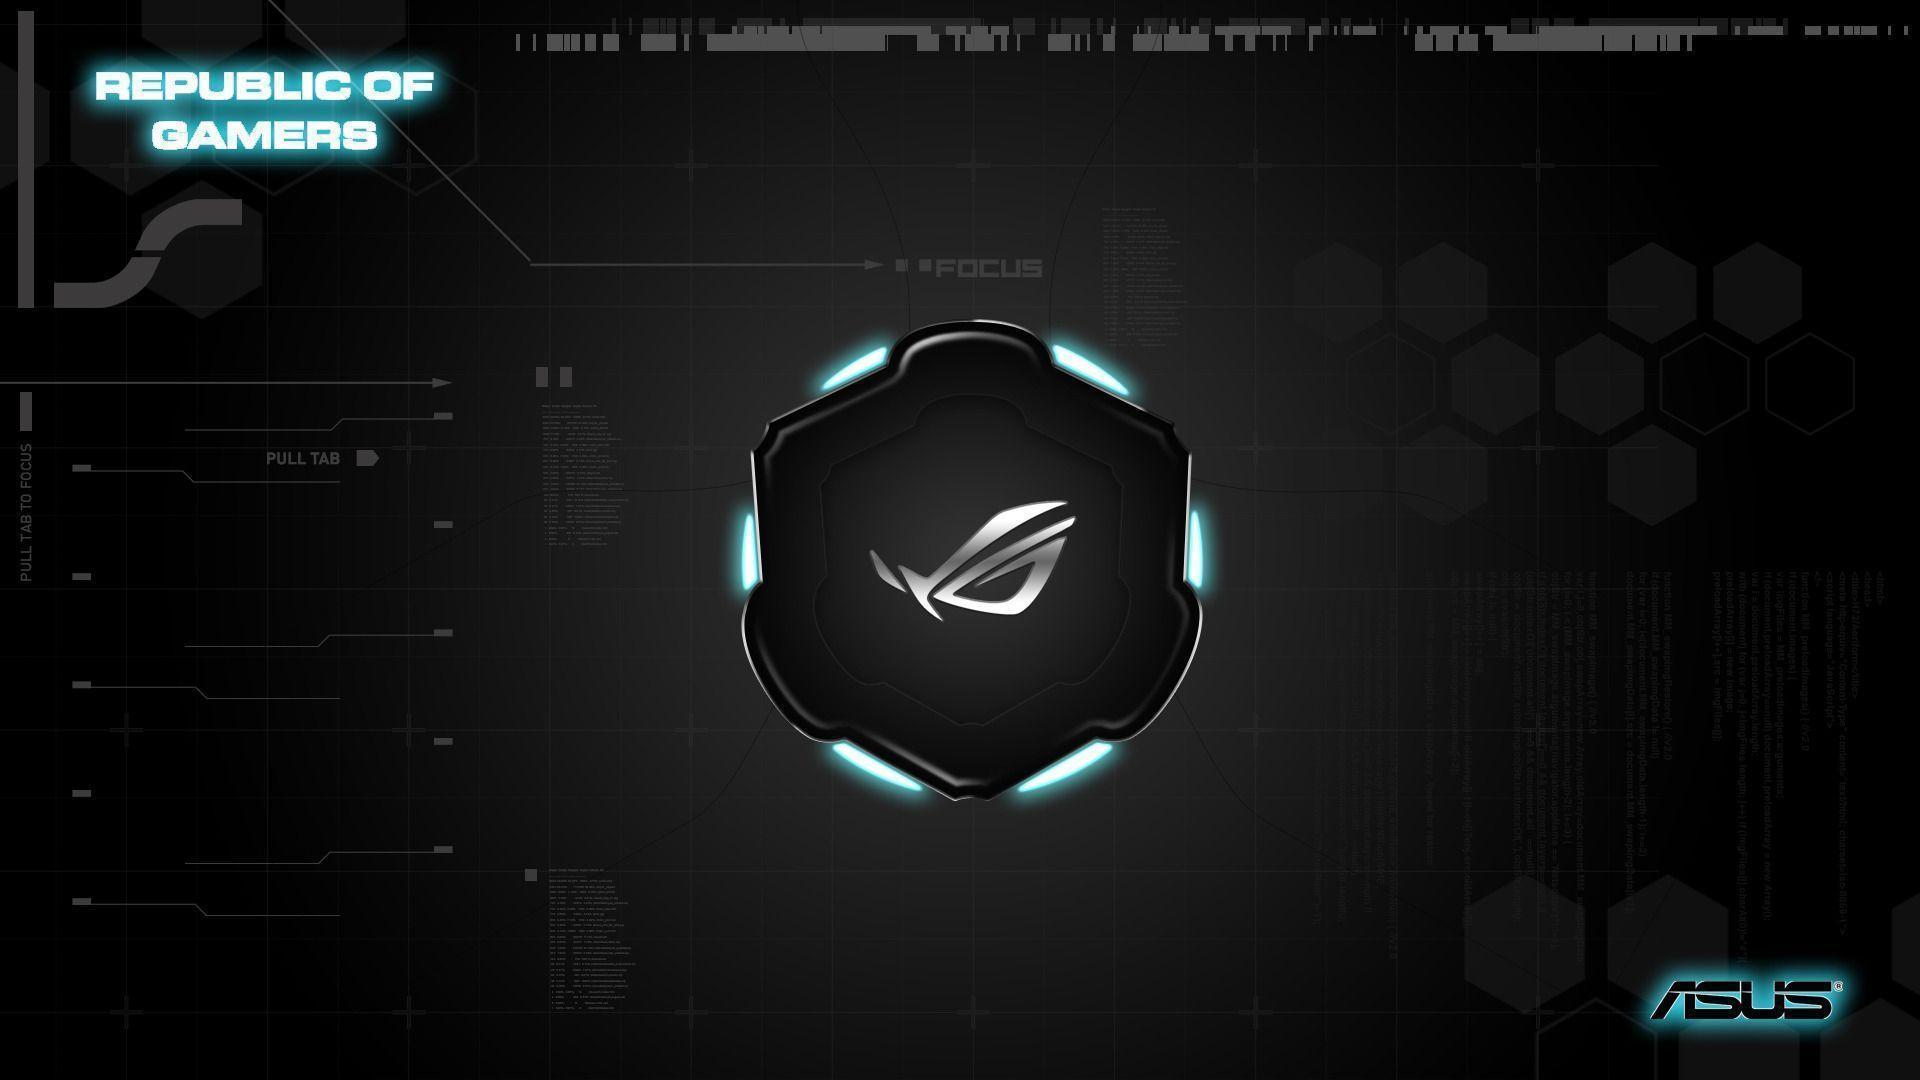 ROG Wallpapers Competition Winners!